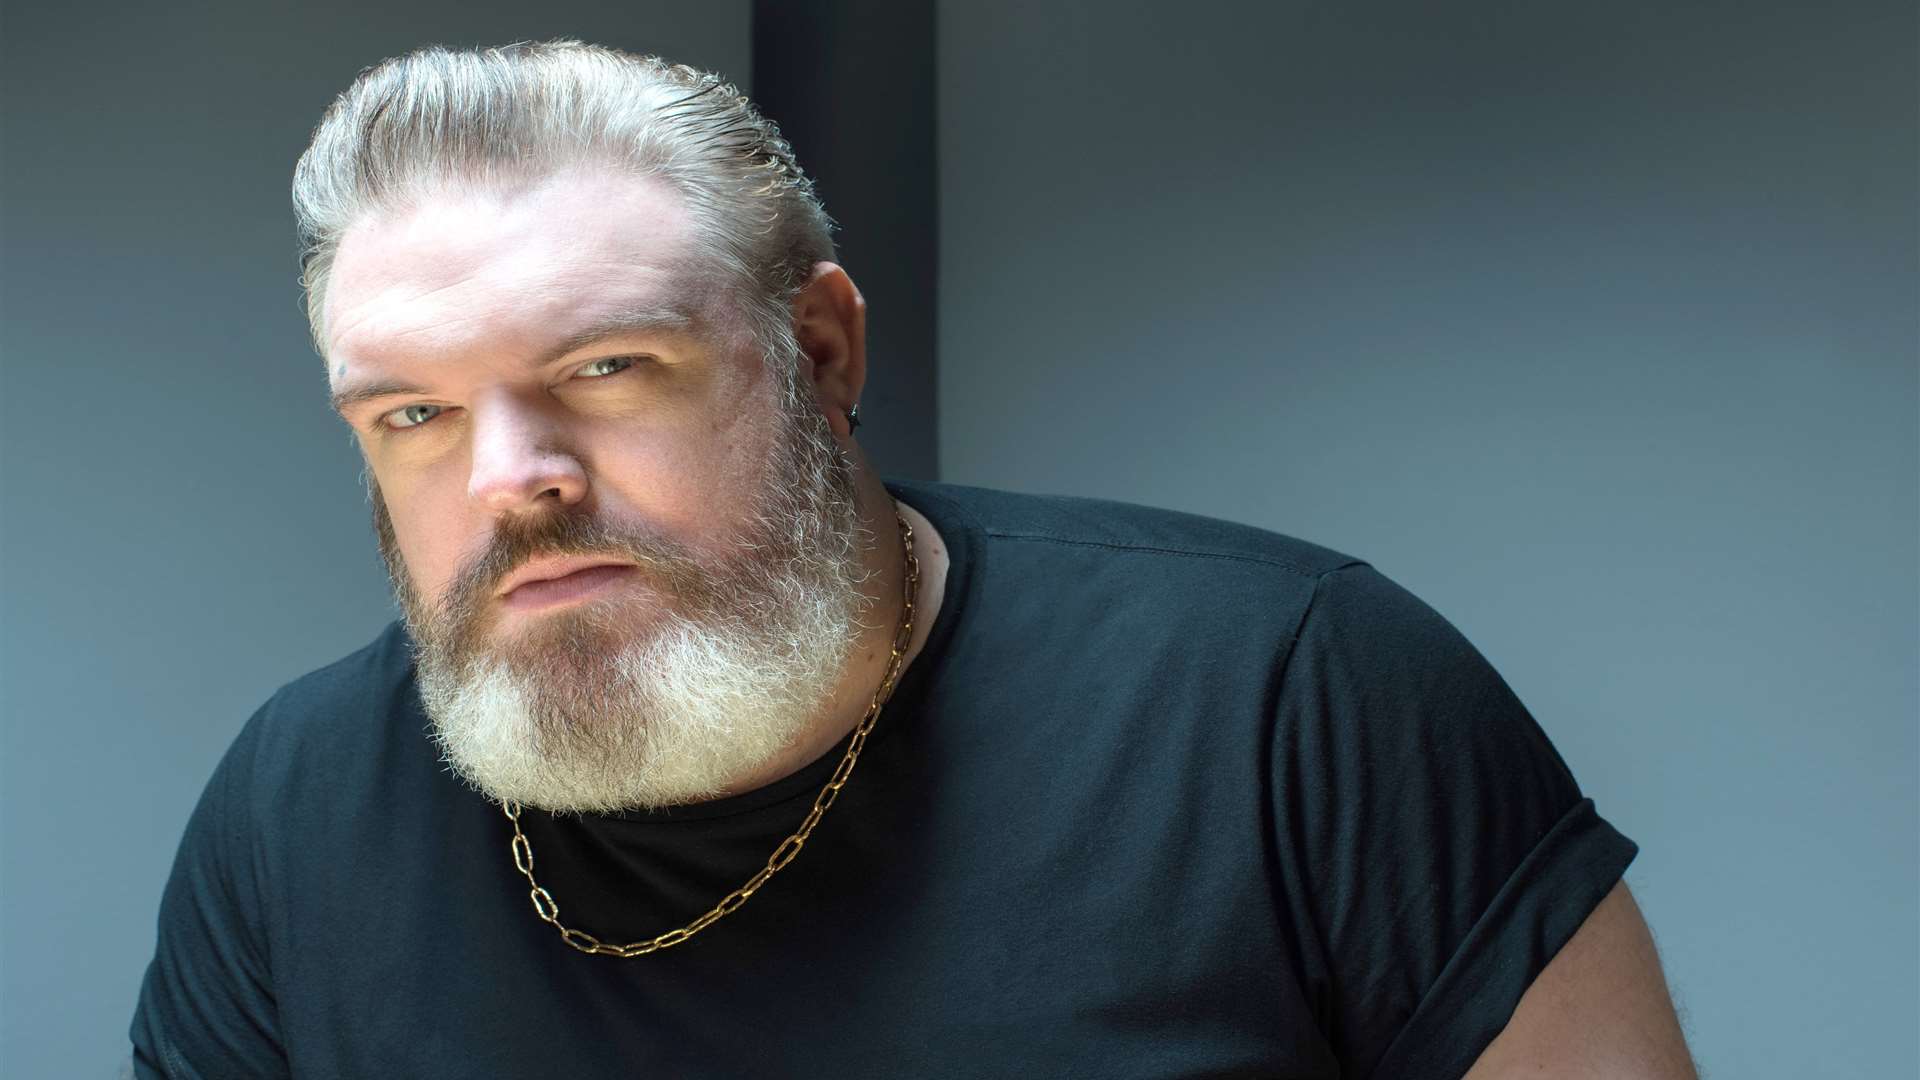 Game of Thrones actor Kristian Nairn, who played Hodor